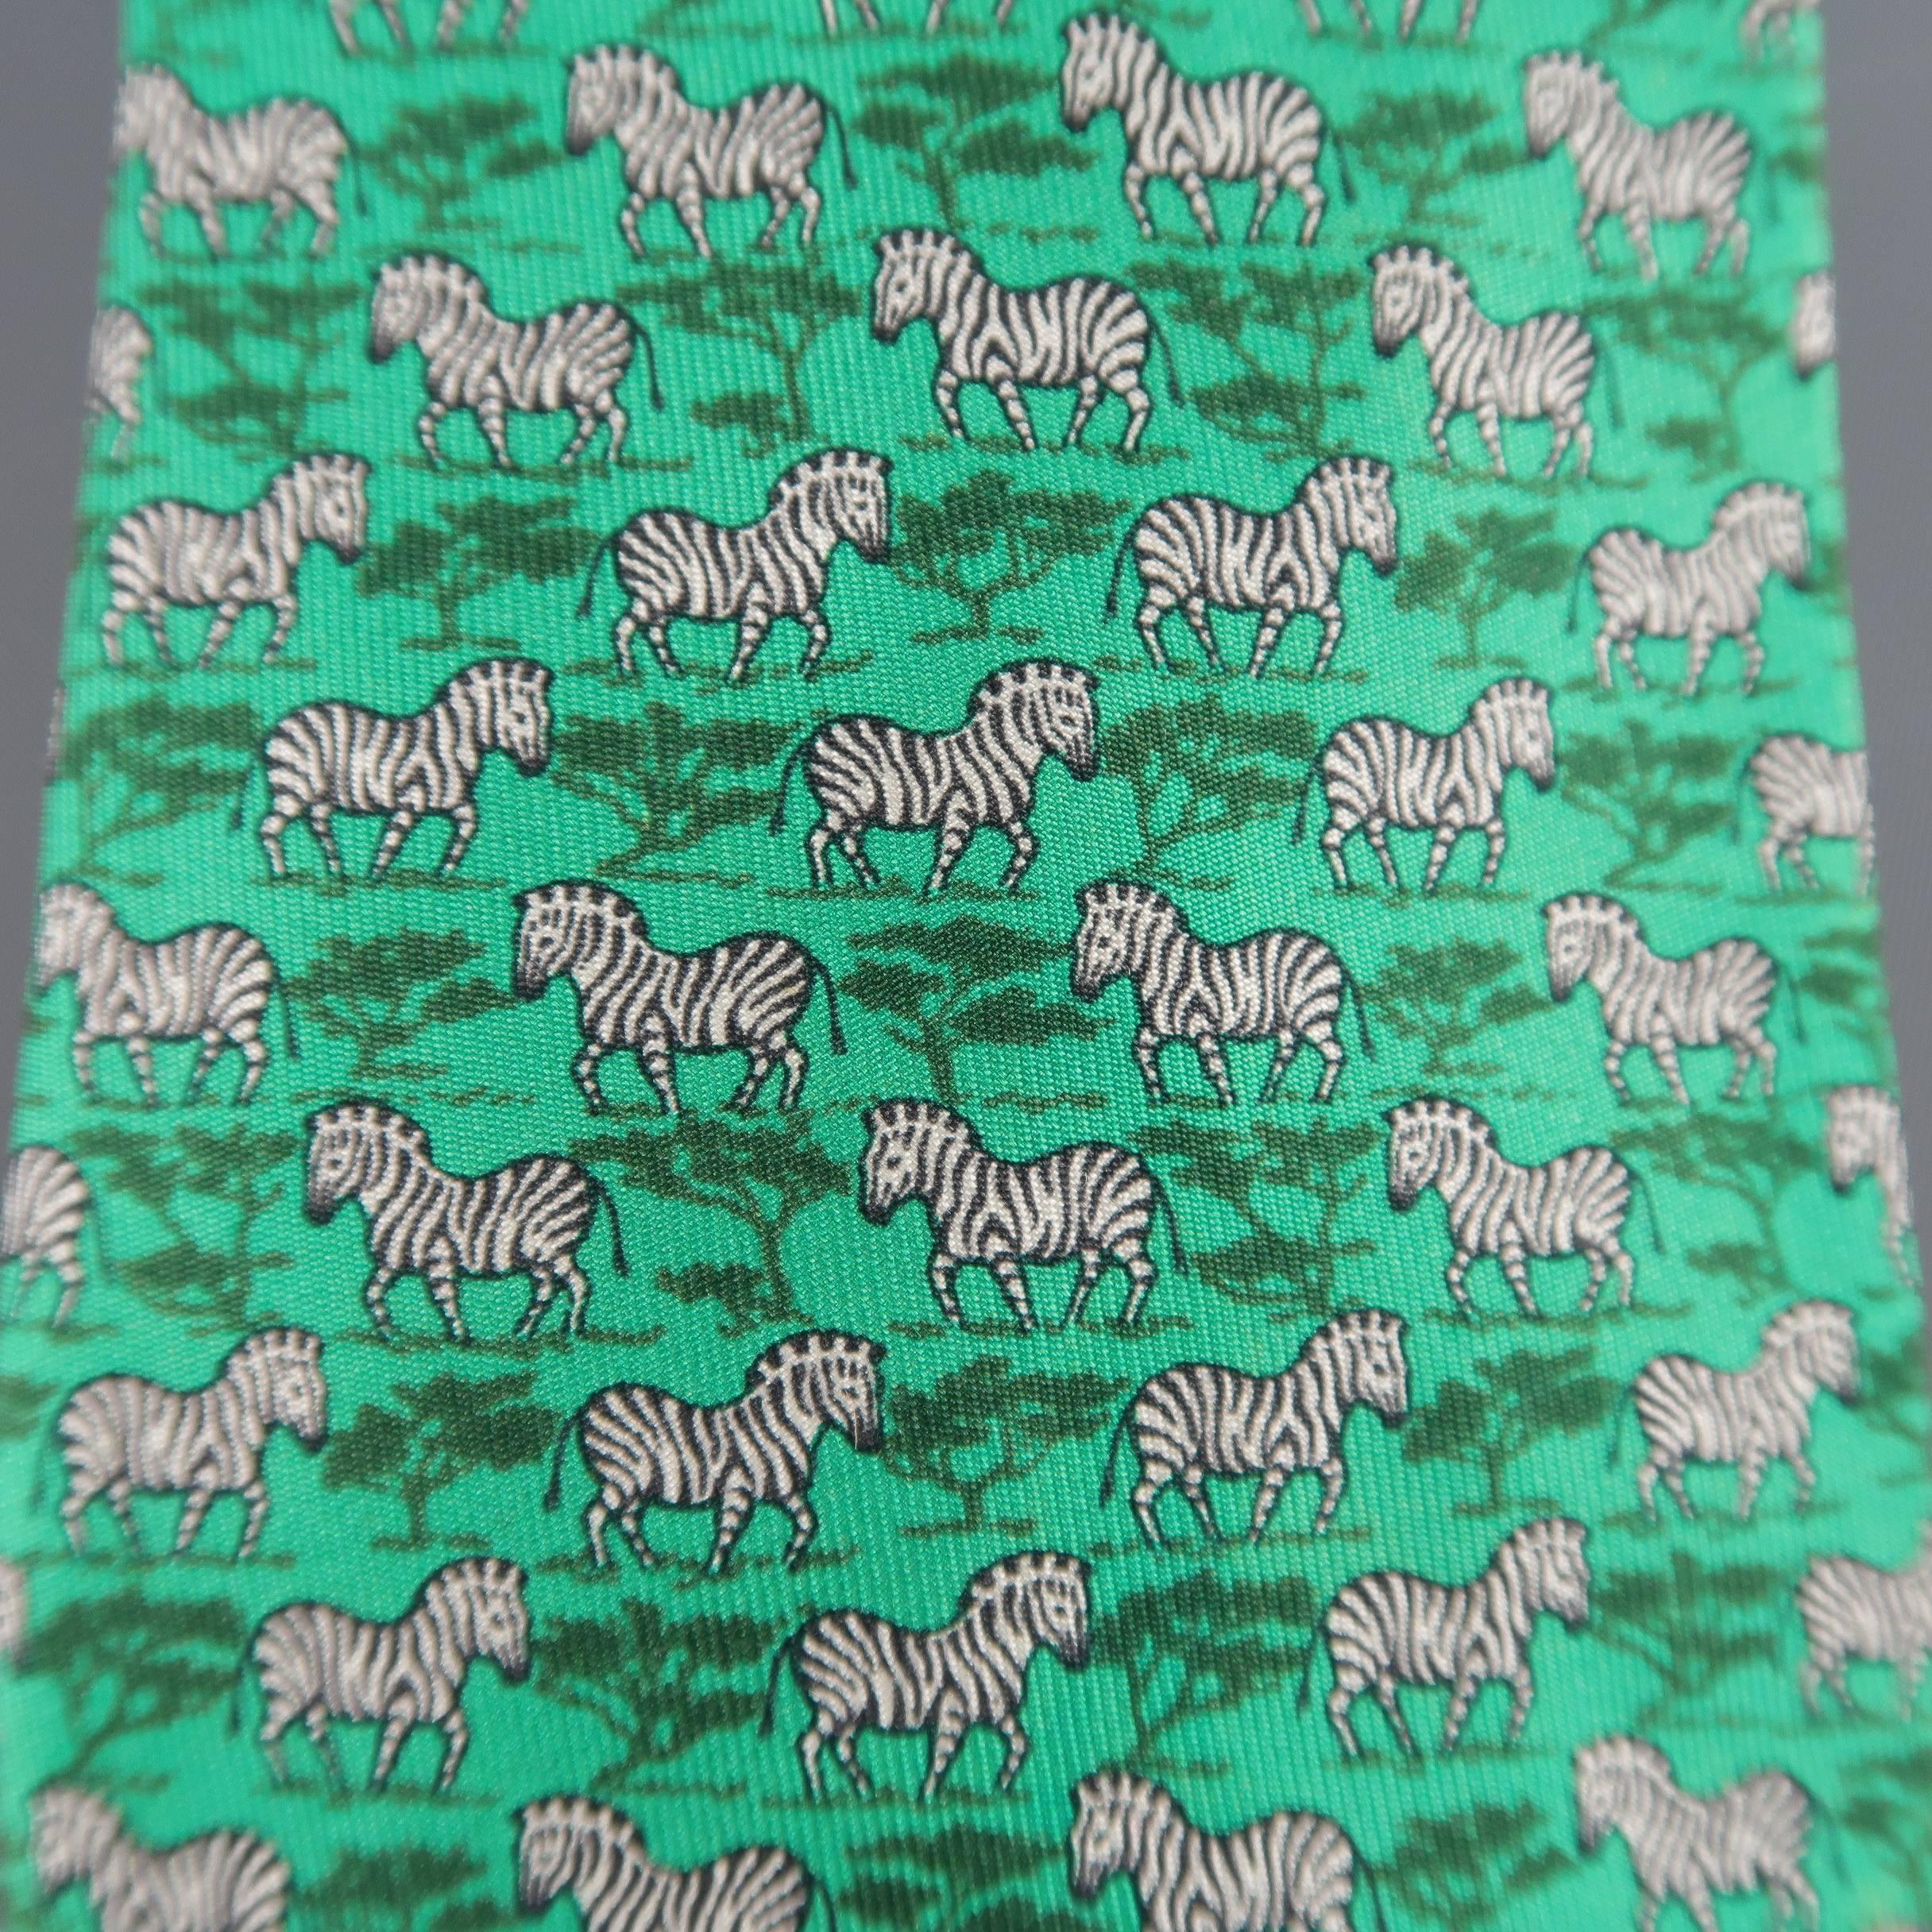 Vintage HERMES necktie comes in emerald green silk twill with all over zebra print. Wear and discolorations. As-is. Made in France.
 
Fair Pre-Owned Condition.
 
Width: 3.25 in.
